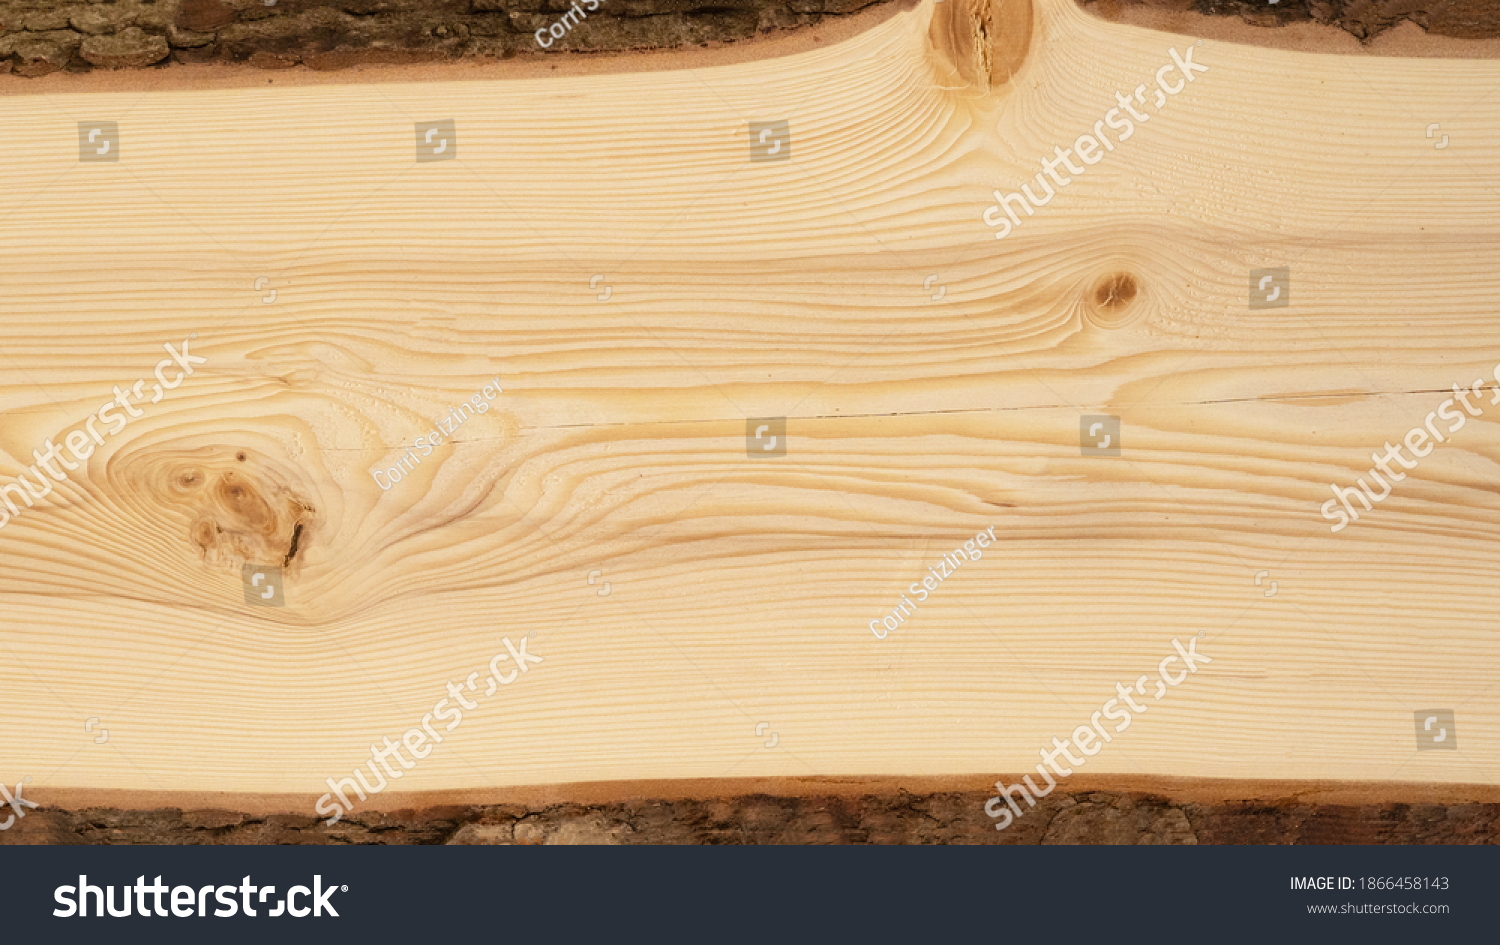 Wood background - Spruce fir wooden table board template, with tree edge and bark and space for text #1866458143